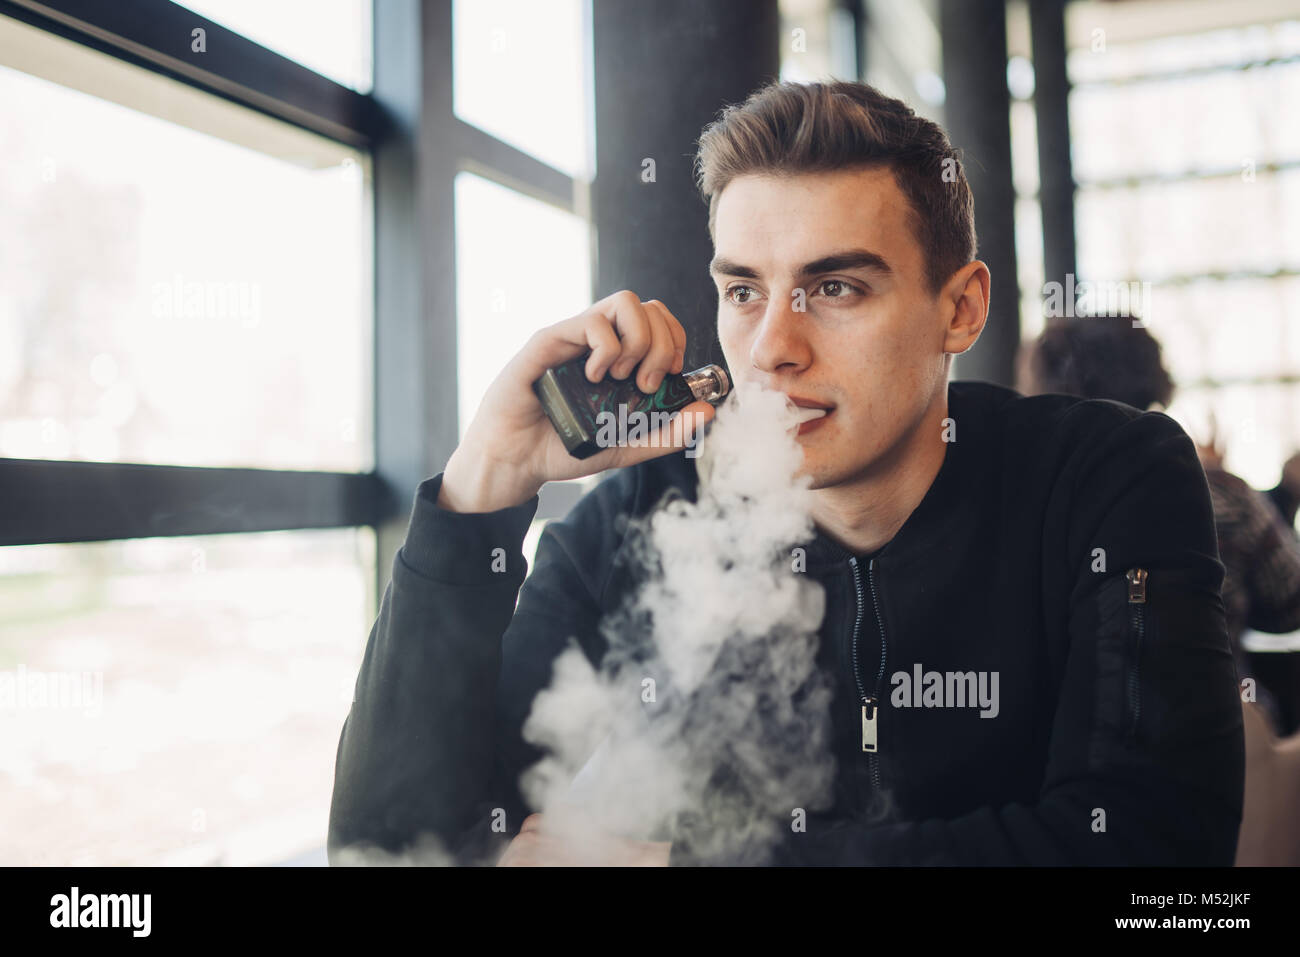 Young man vaping in closed public space.Smoking electronic cigarette in cafe.Nicotine addiction.Way to quit smoking,old habit.Vaping aroma,urban man u Stock Photo